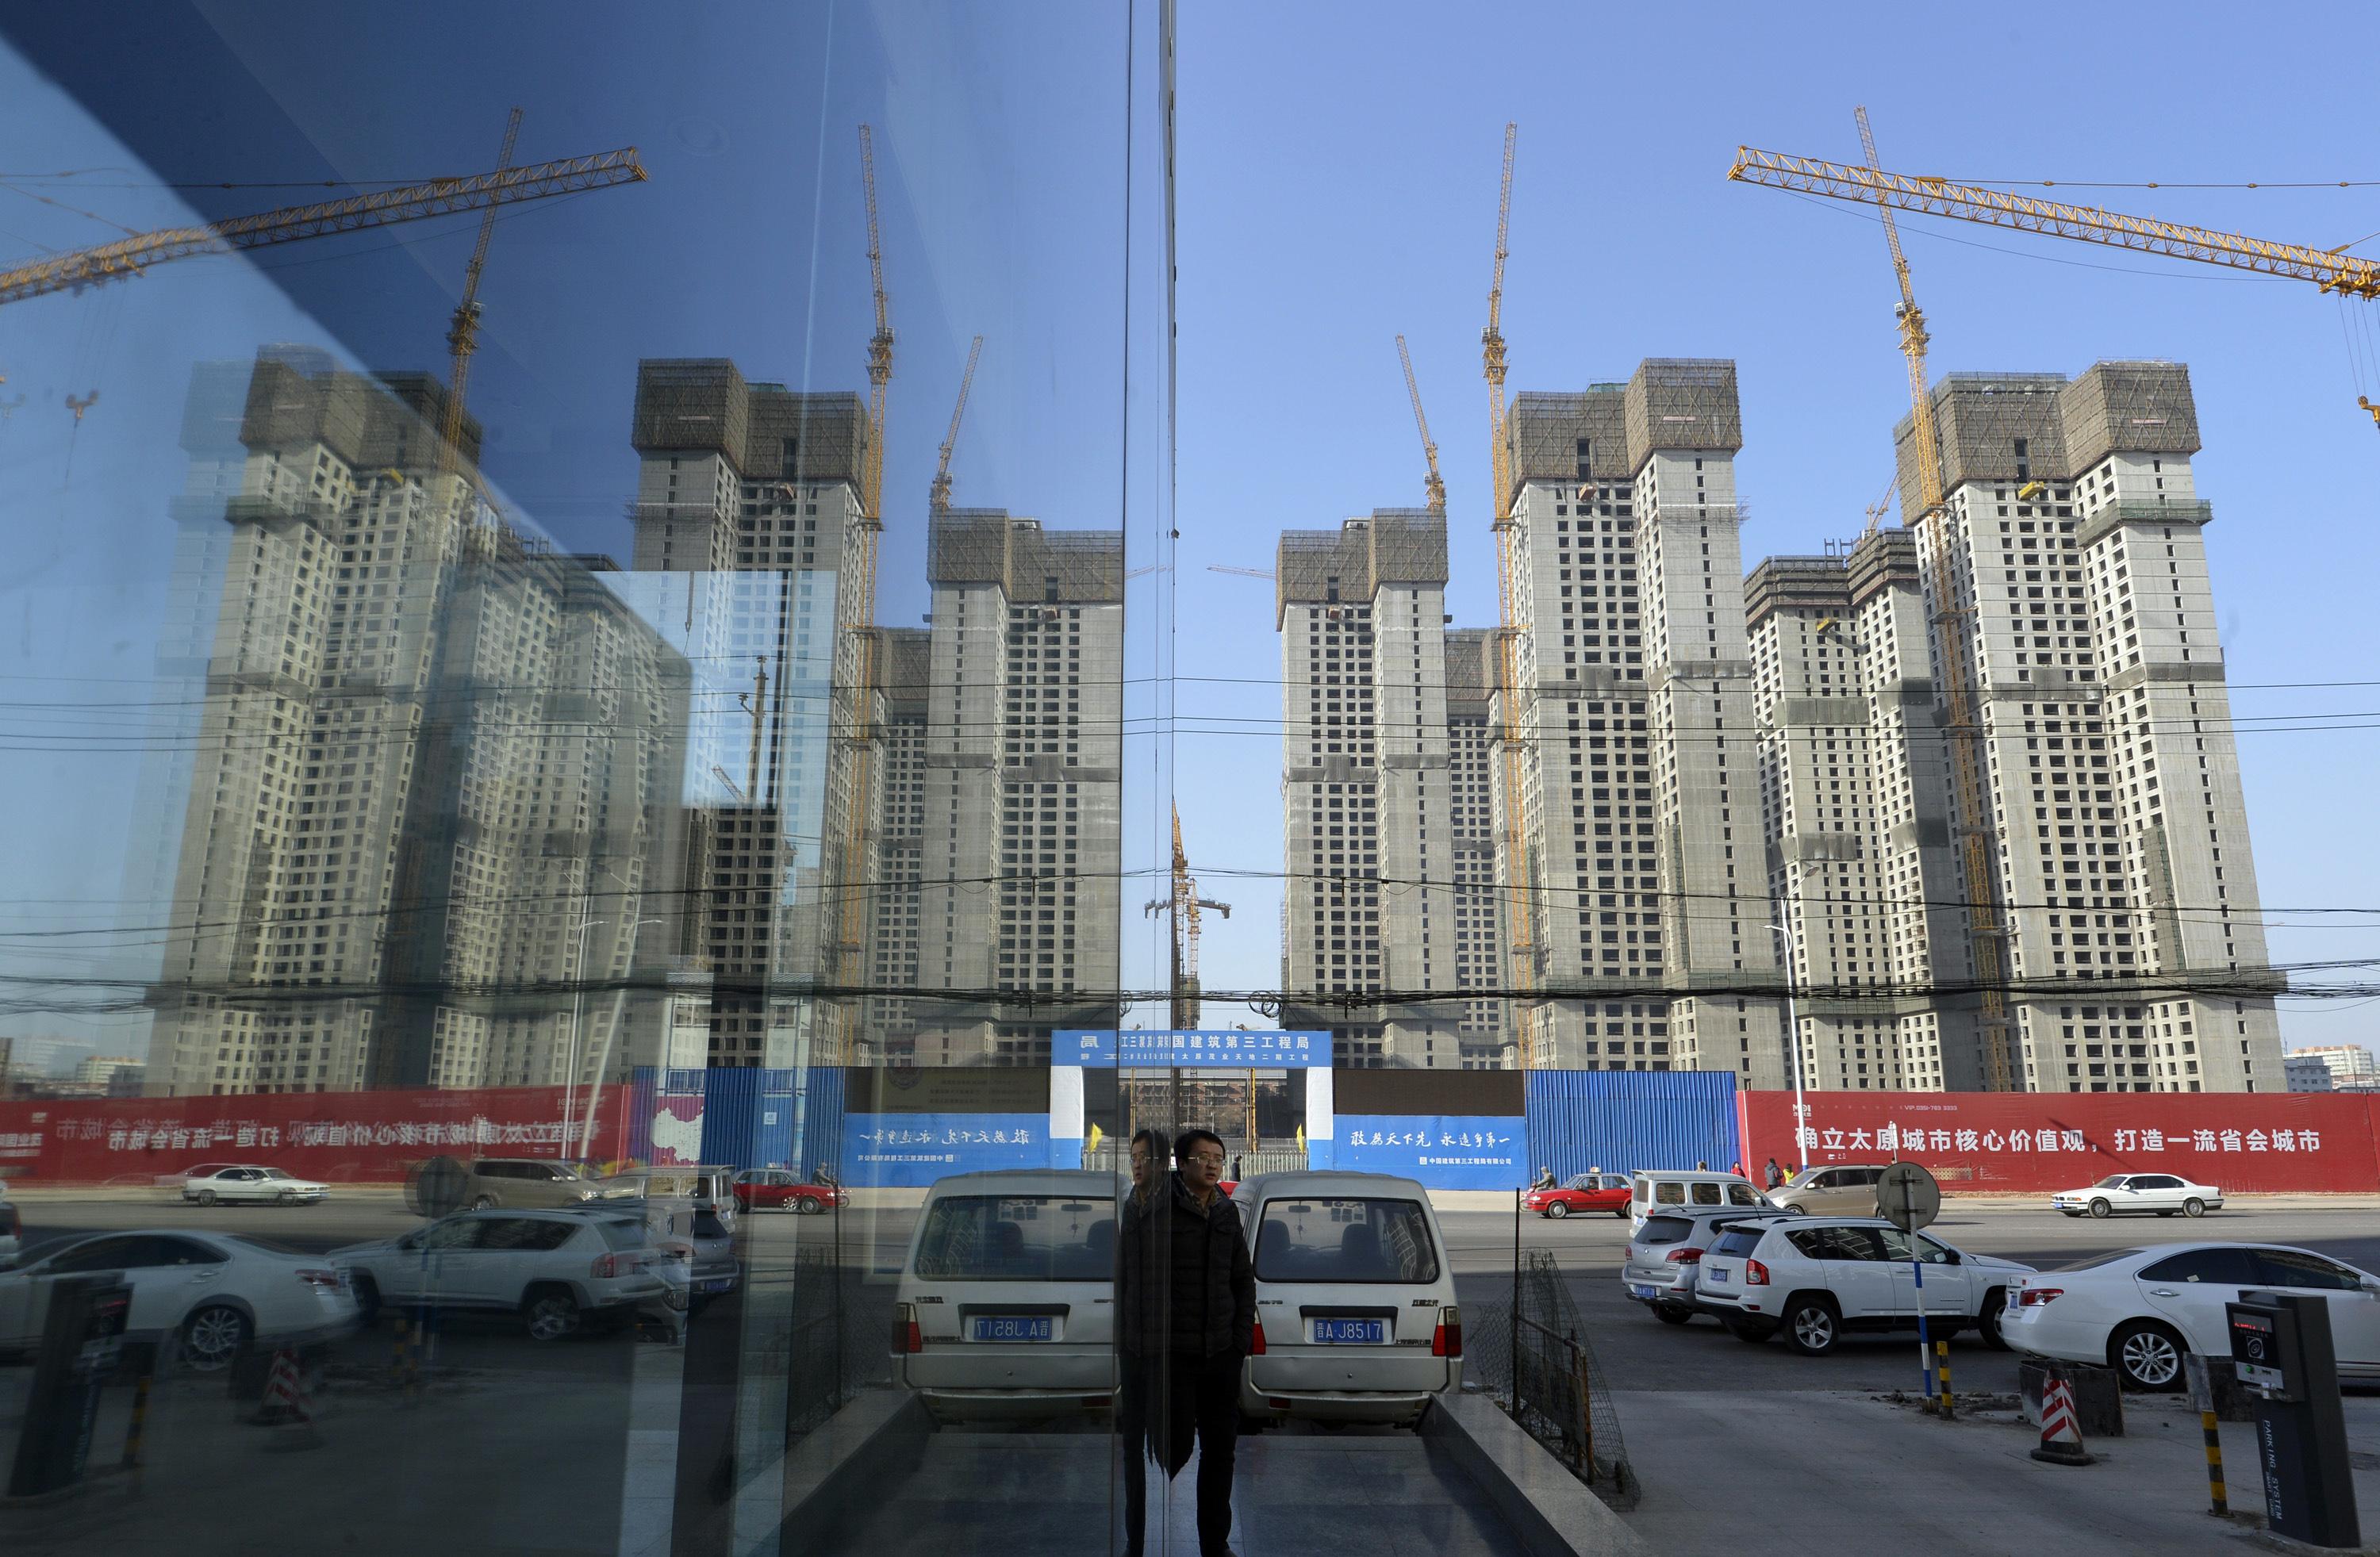 The ongoing hukou reform will help the urbanisation process and lessen the impact of the unfavourable demographic trend. Photo: Reuters